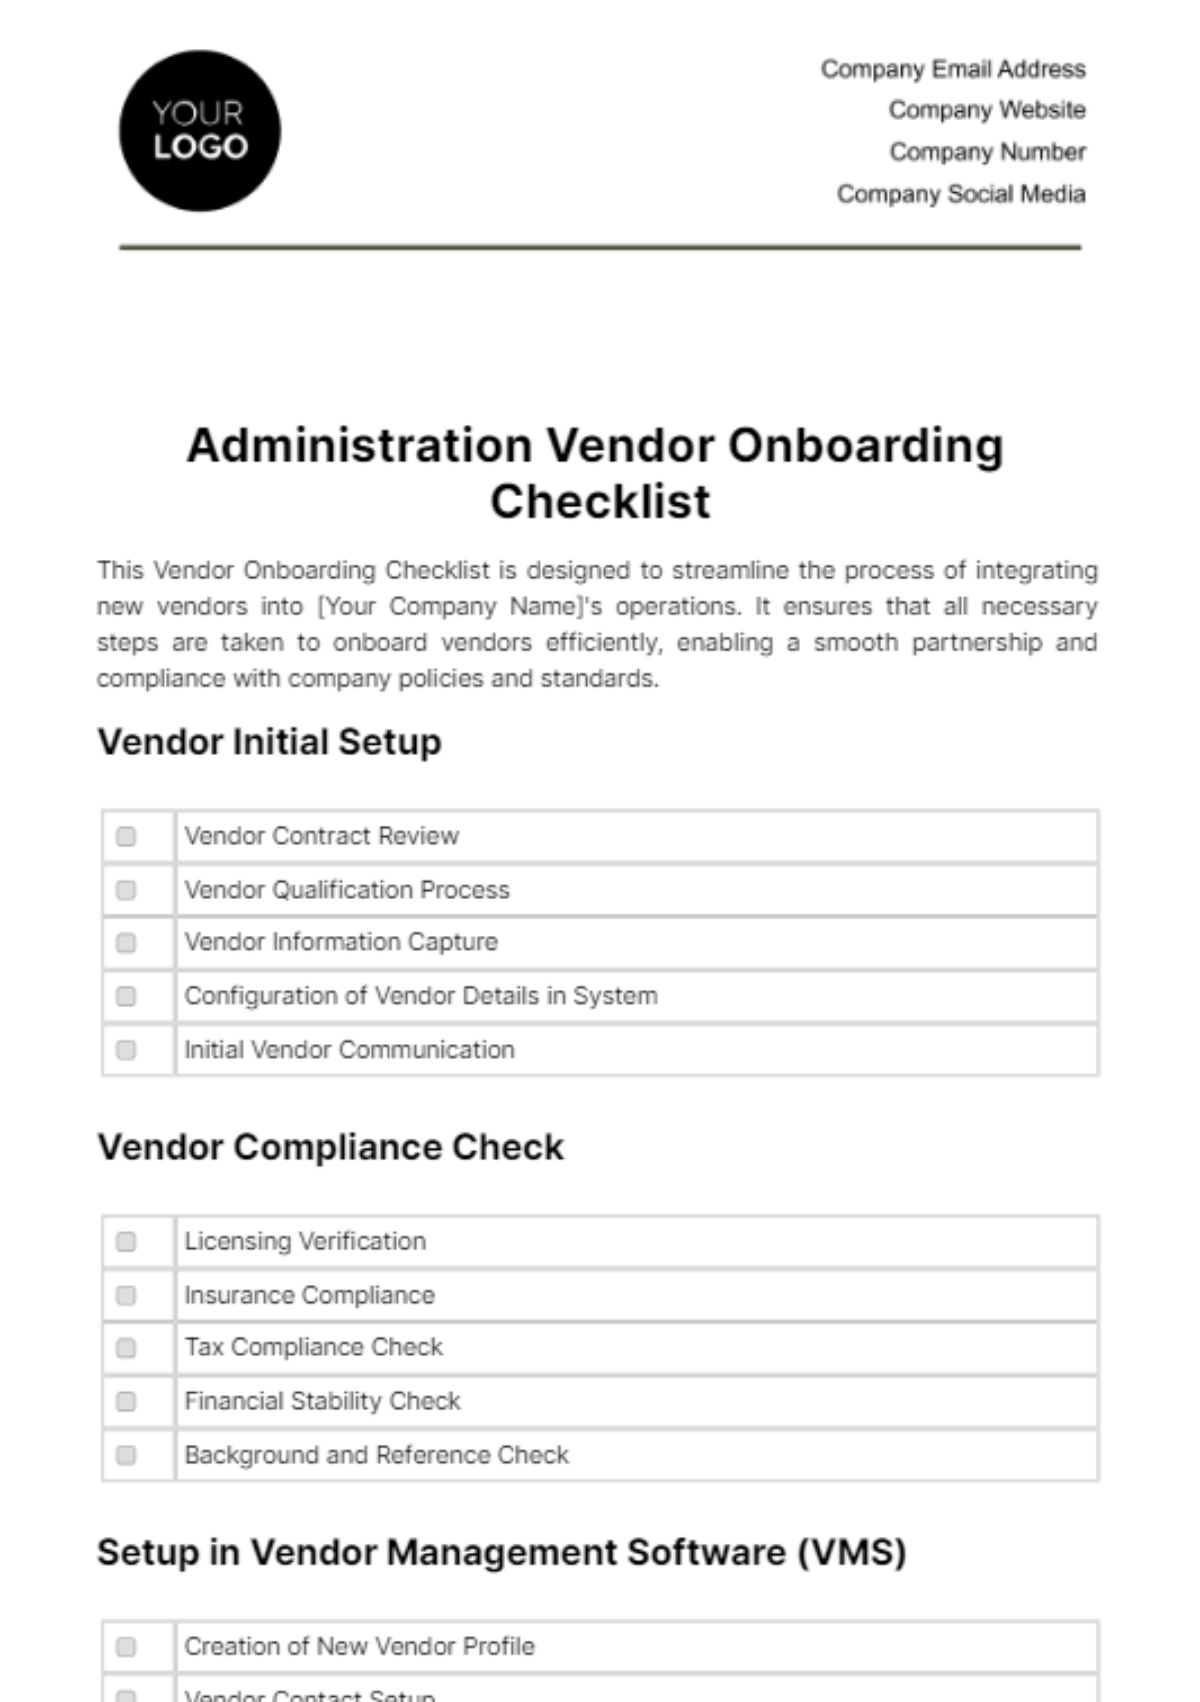 Free Administration Vendor Onboarding Checklist Template